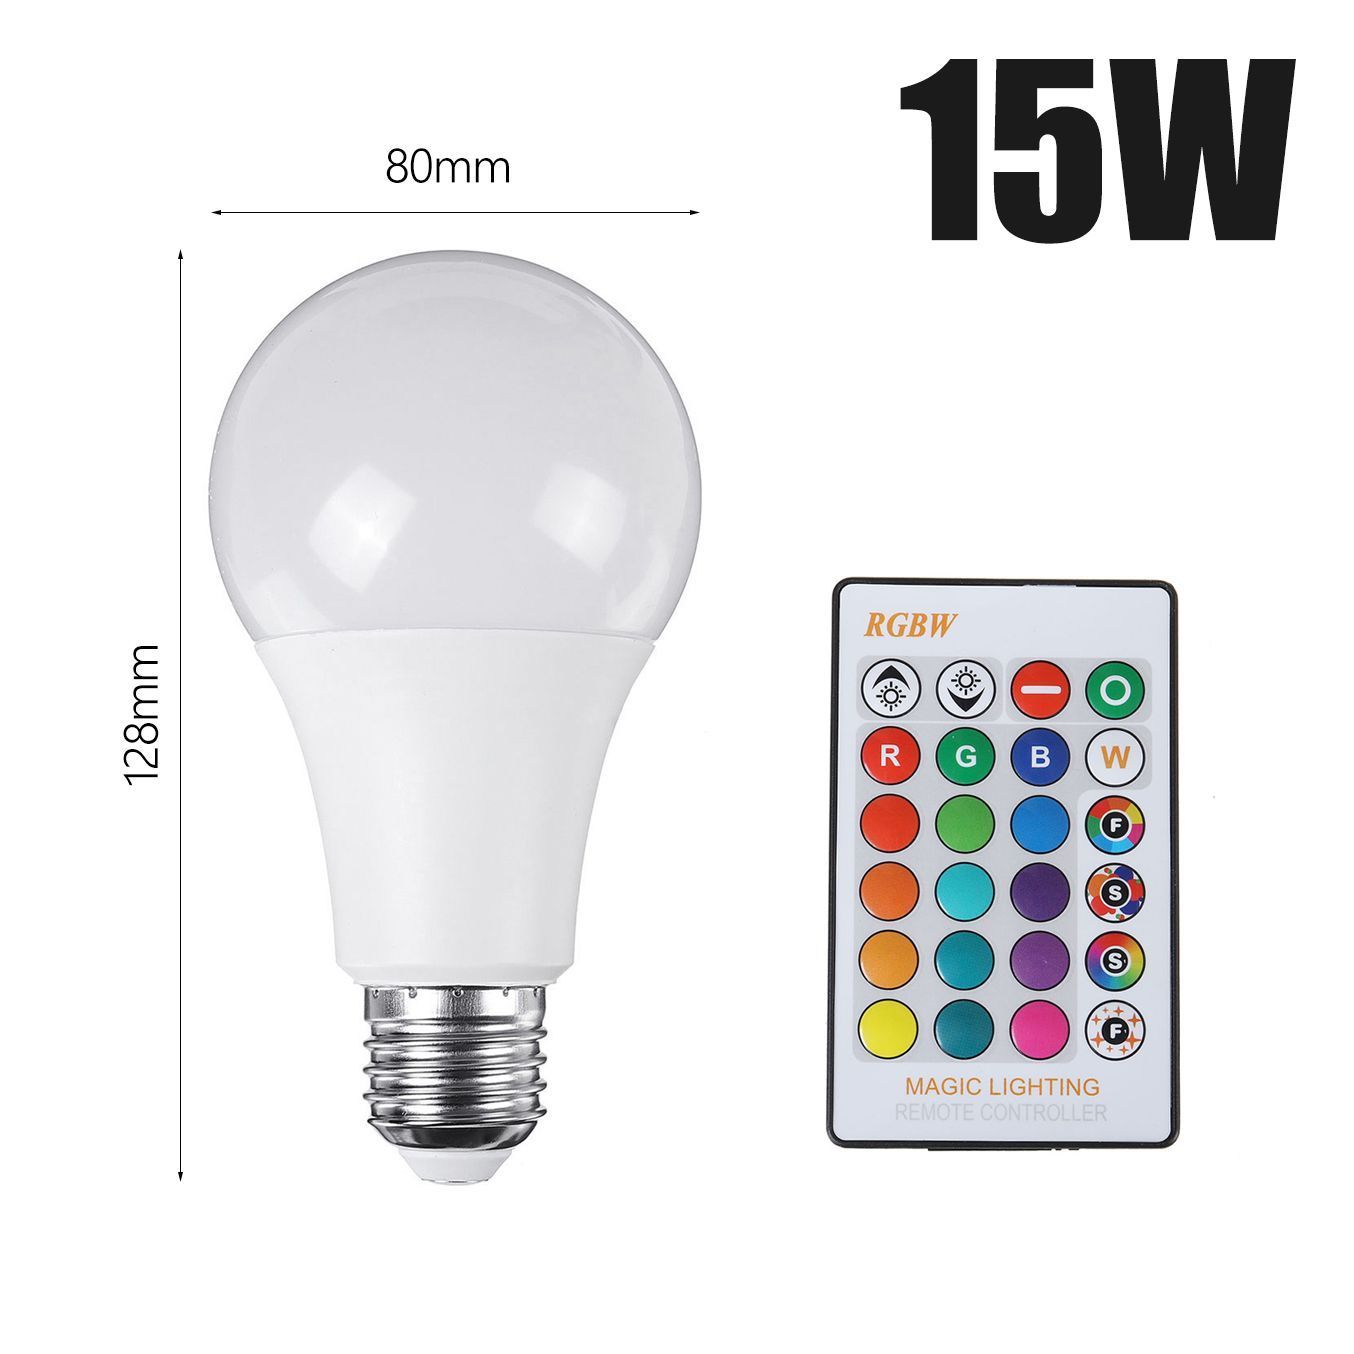 3W-5W-10W-15W-RGBW-E27-LED-Bulb-16-Color-Dimmable-Globe-Light-With-Remote-Control-For-Party-Decorati-1680651